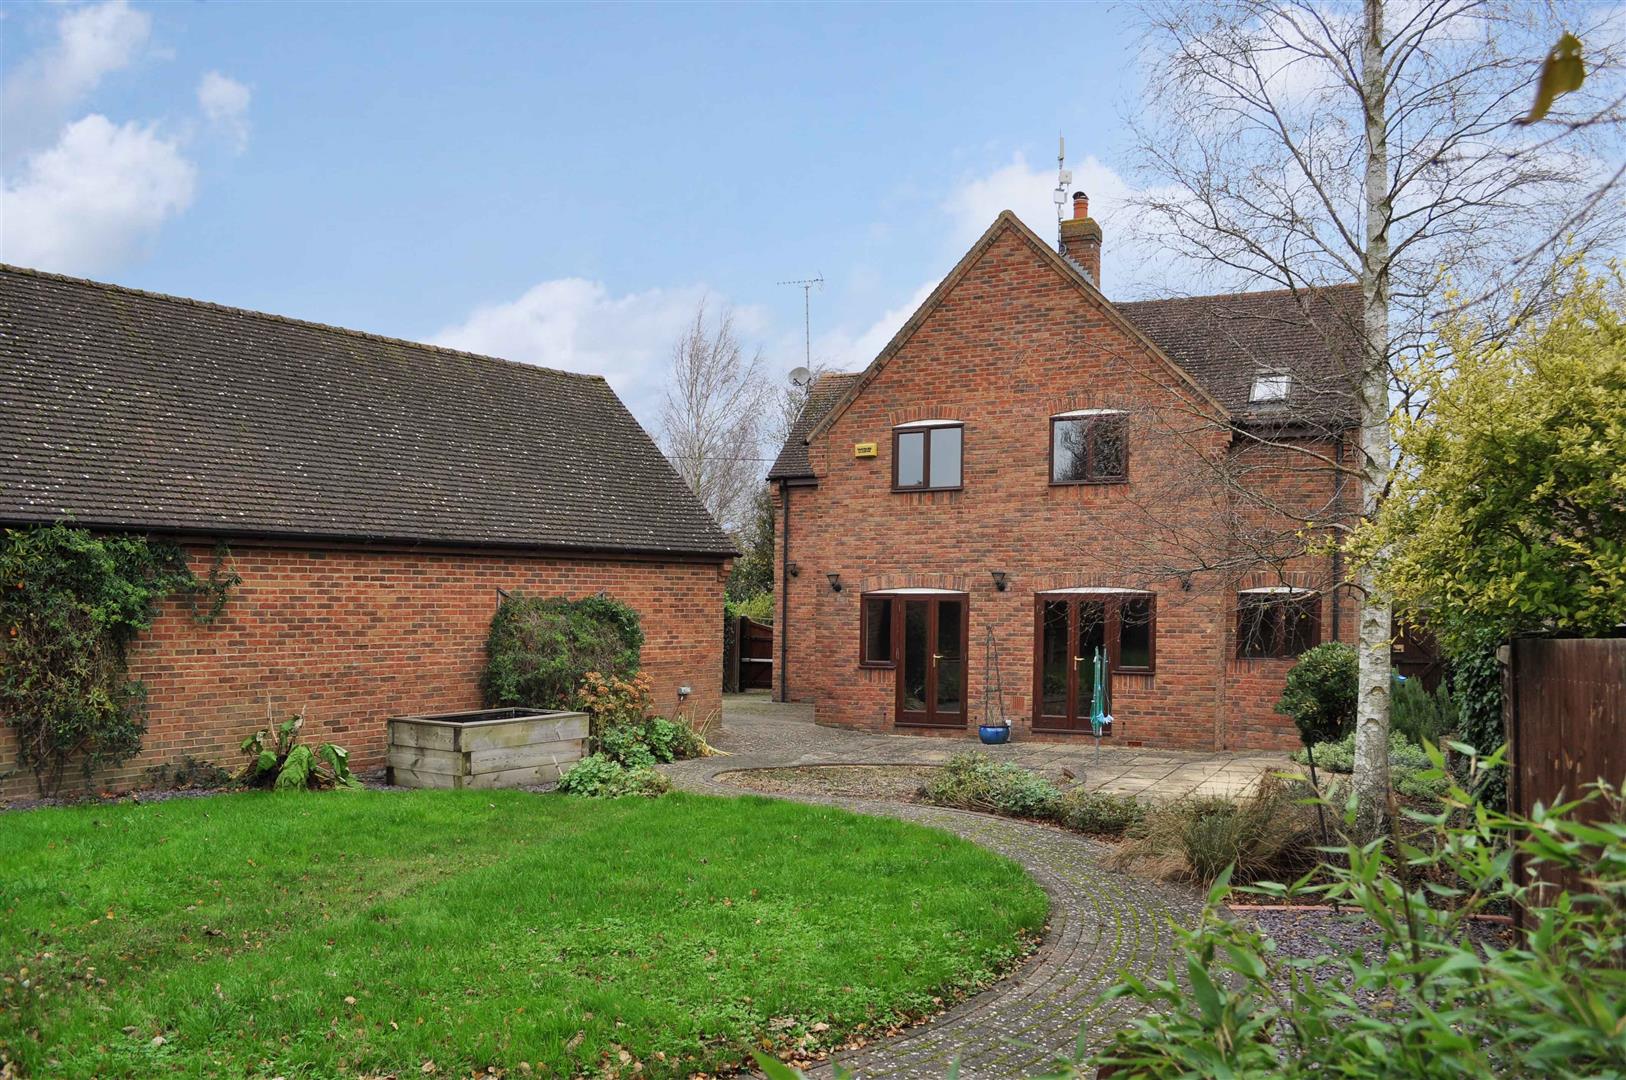 4 bedroom Detached House for sale in Steeple Claydon ...